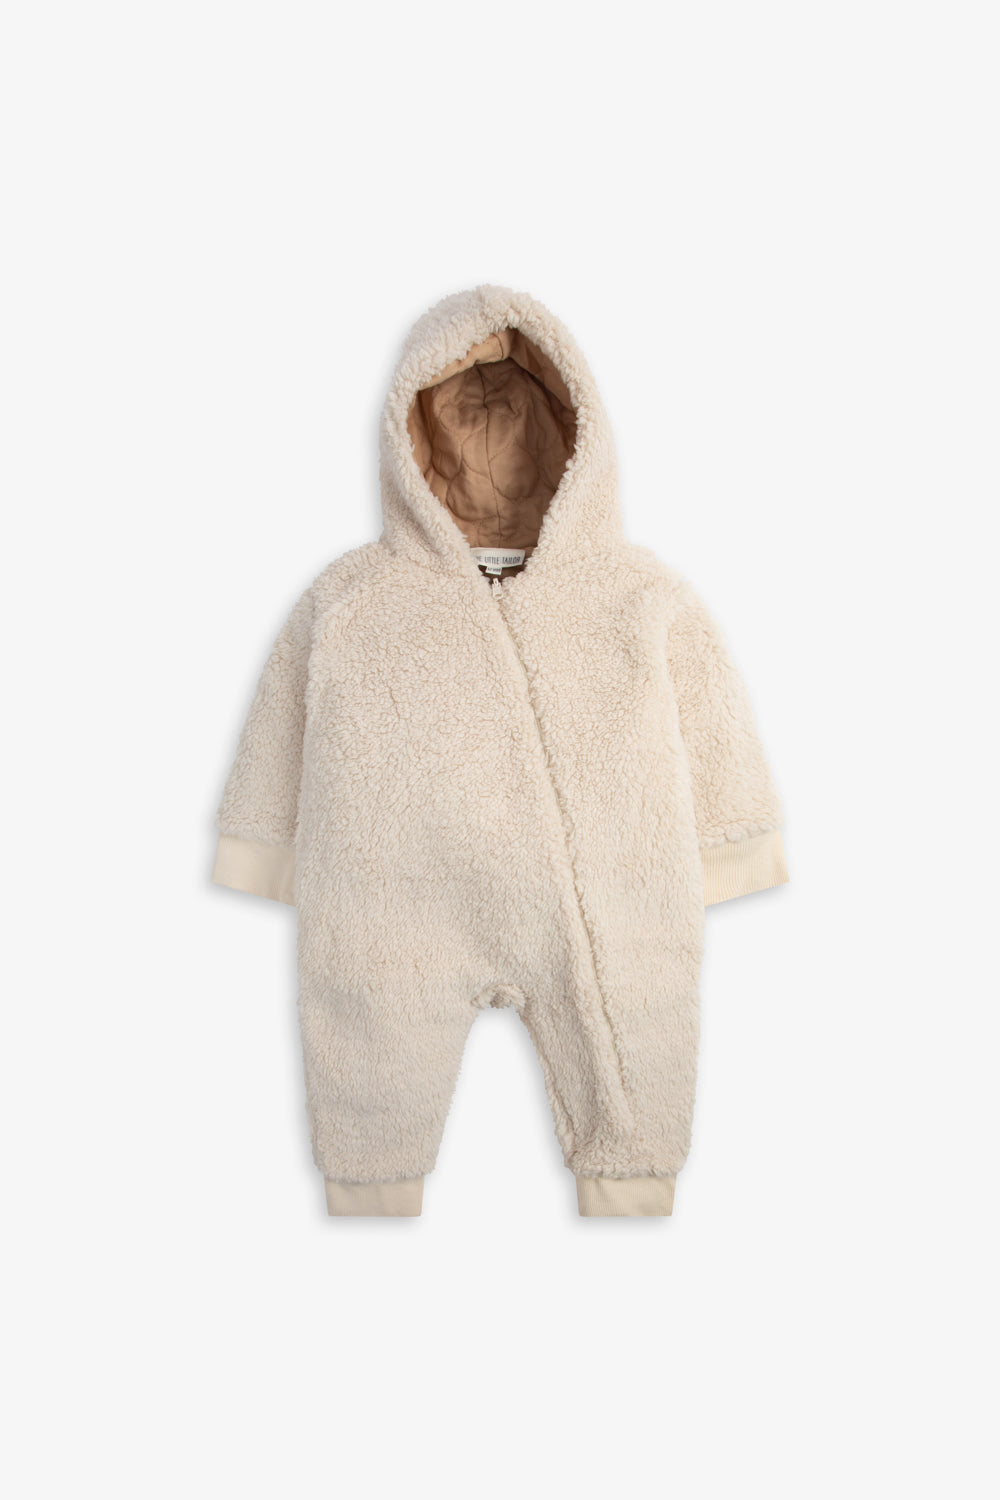 Cream Plush Sherpa Quilted Reversible Pramsuit